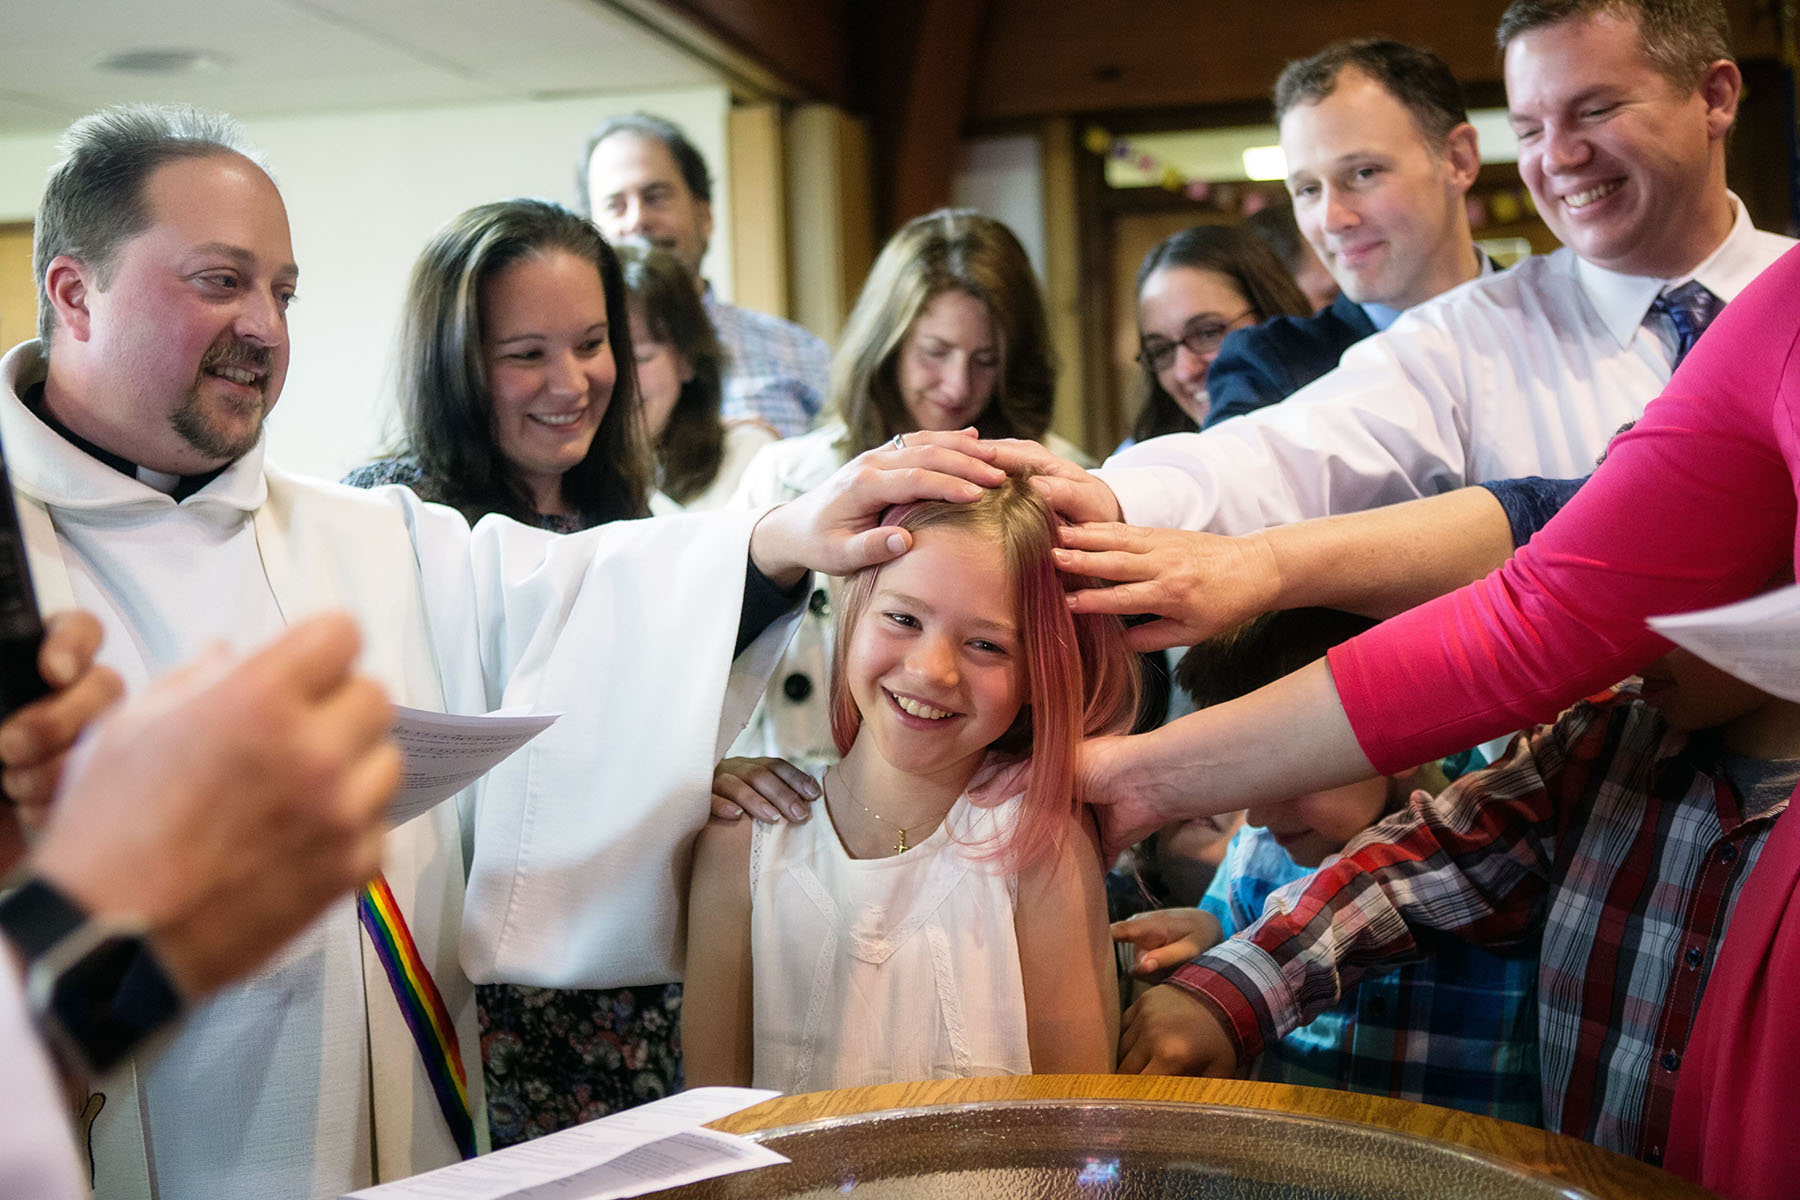 Rebekah smiles as her congregation blesses her during a "Name Blessing," which was held on the 10th anniversary of her baptism and two years after her transition, with her grandfather, who had baptized her, presiding.